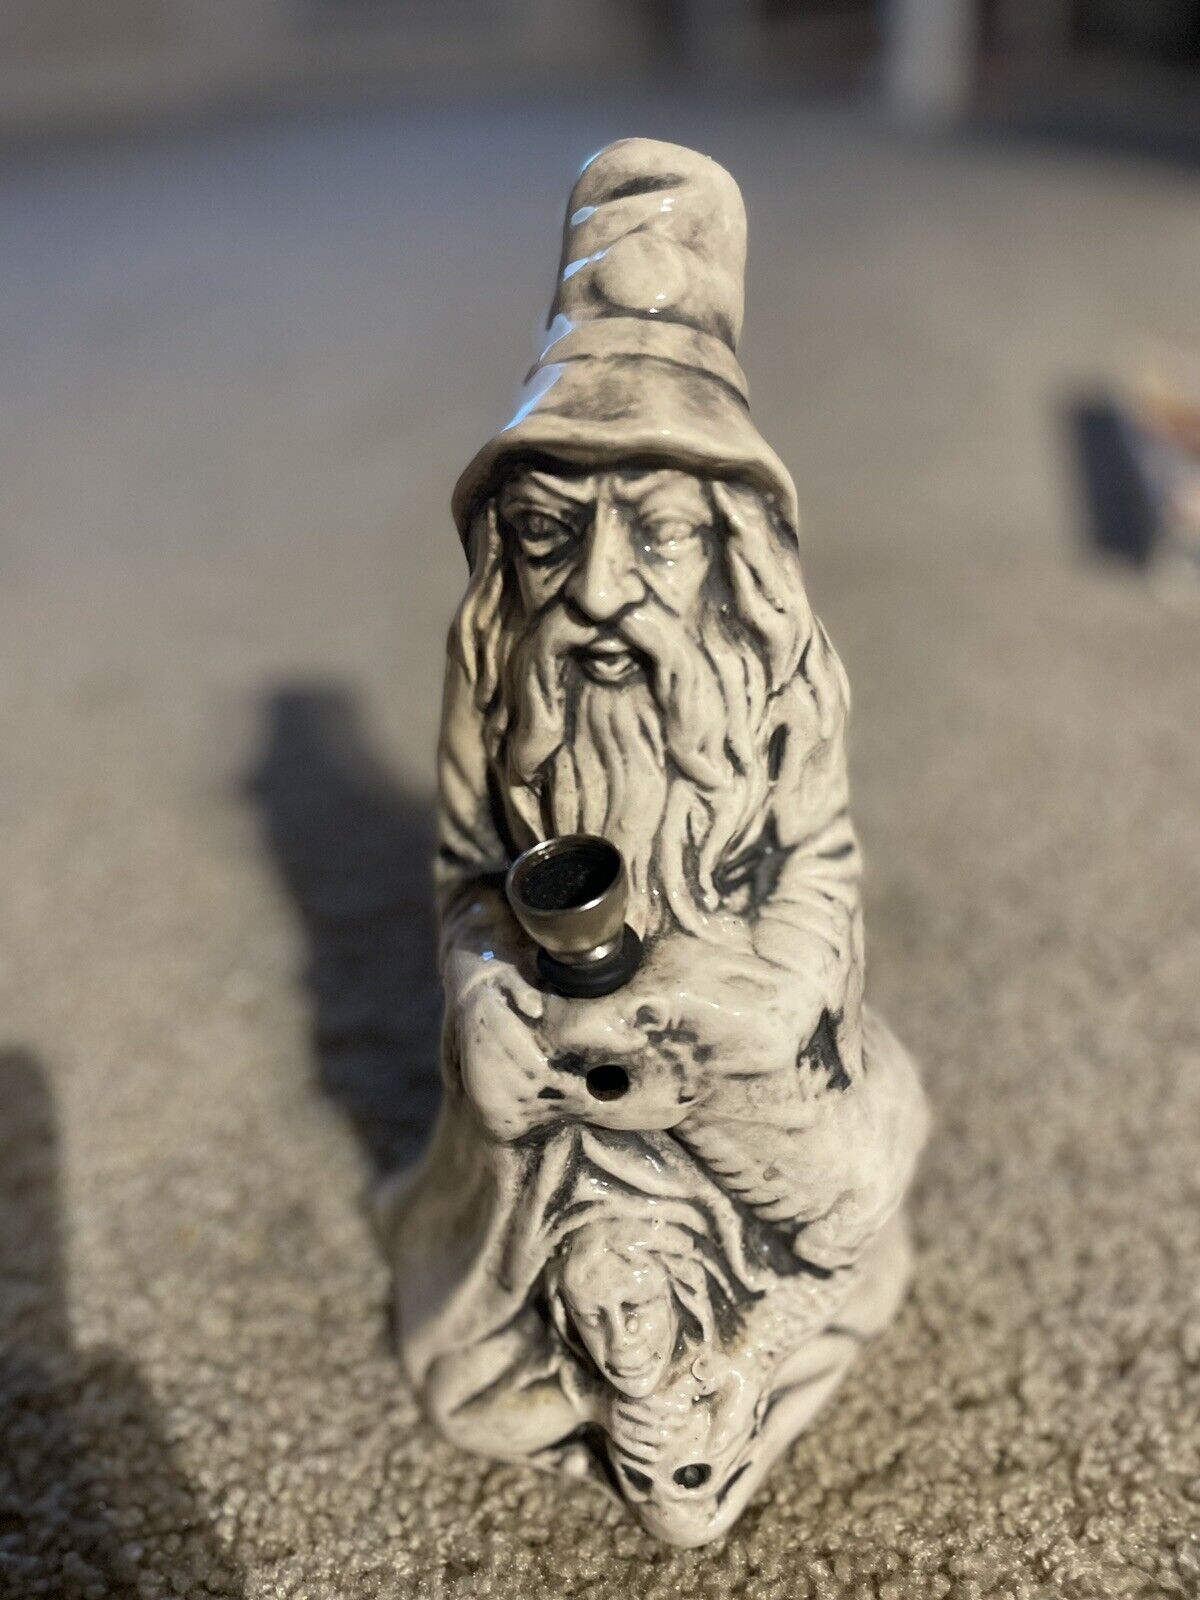 CERAMIC TOBACCO SMOKING WATER PIPE WATERPIPE WIZARD SITTING ON GIRL 8 TALL. Available Now for 35.90